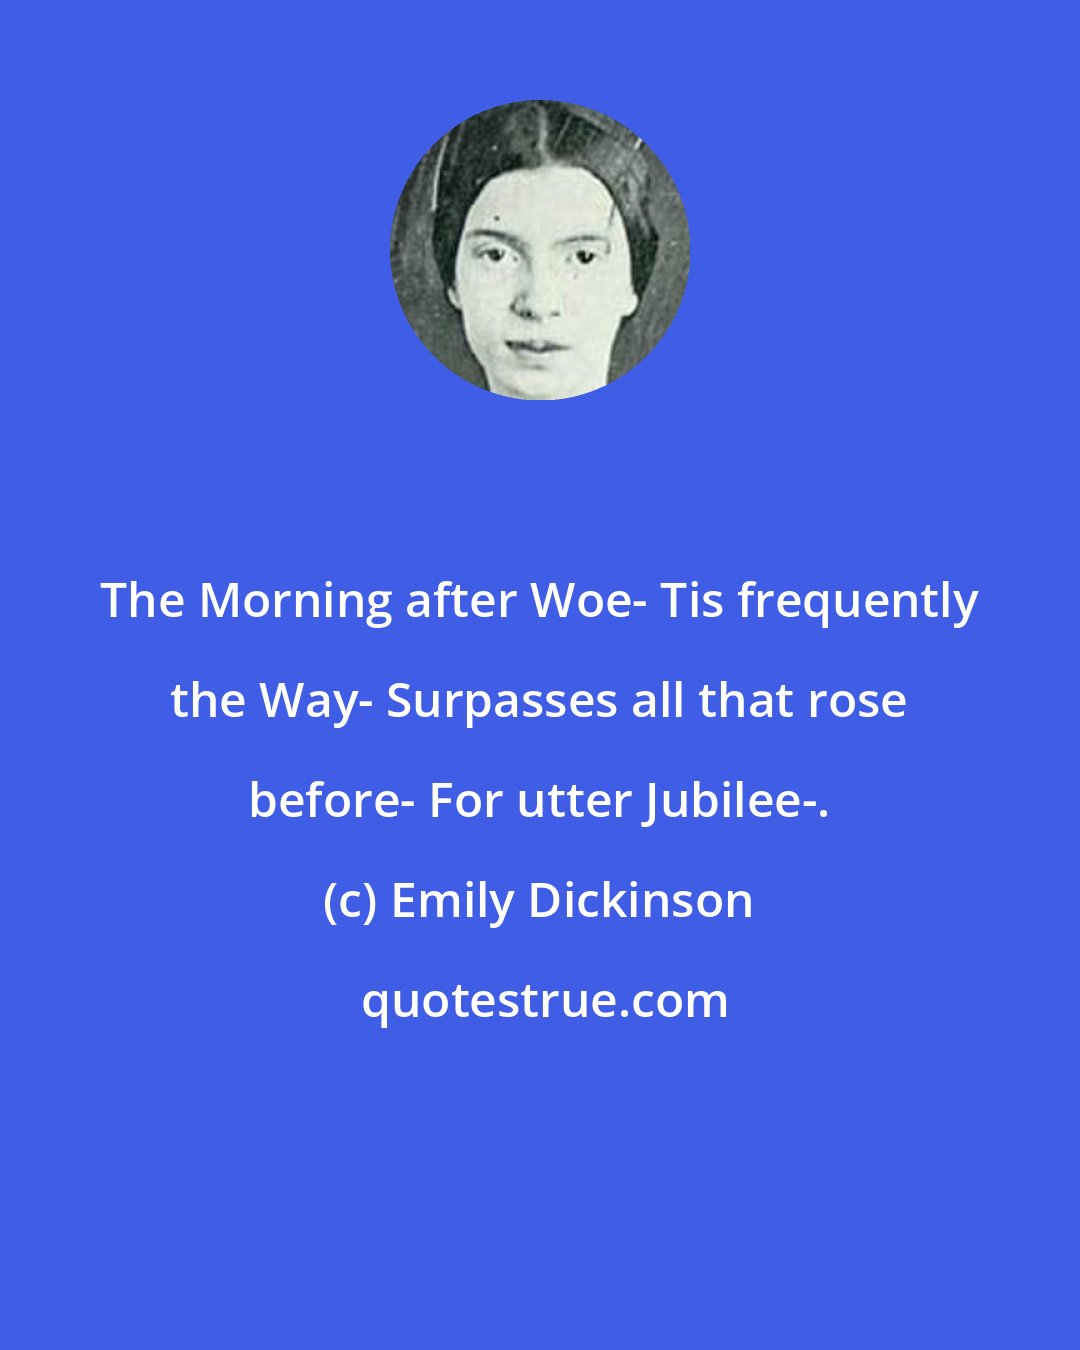 Emily Dickinson: The Morning after Woe- Tis frequently the Way- Surpasses all that rose before- For utter Jubilee-.